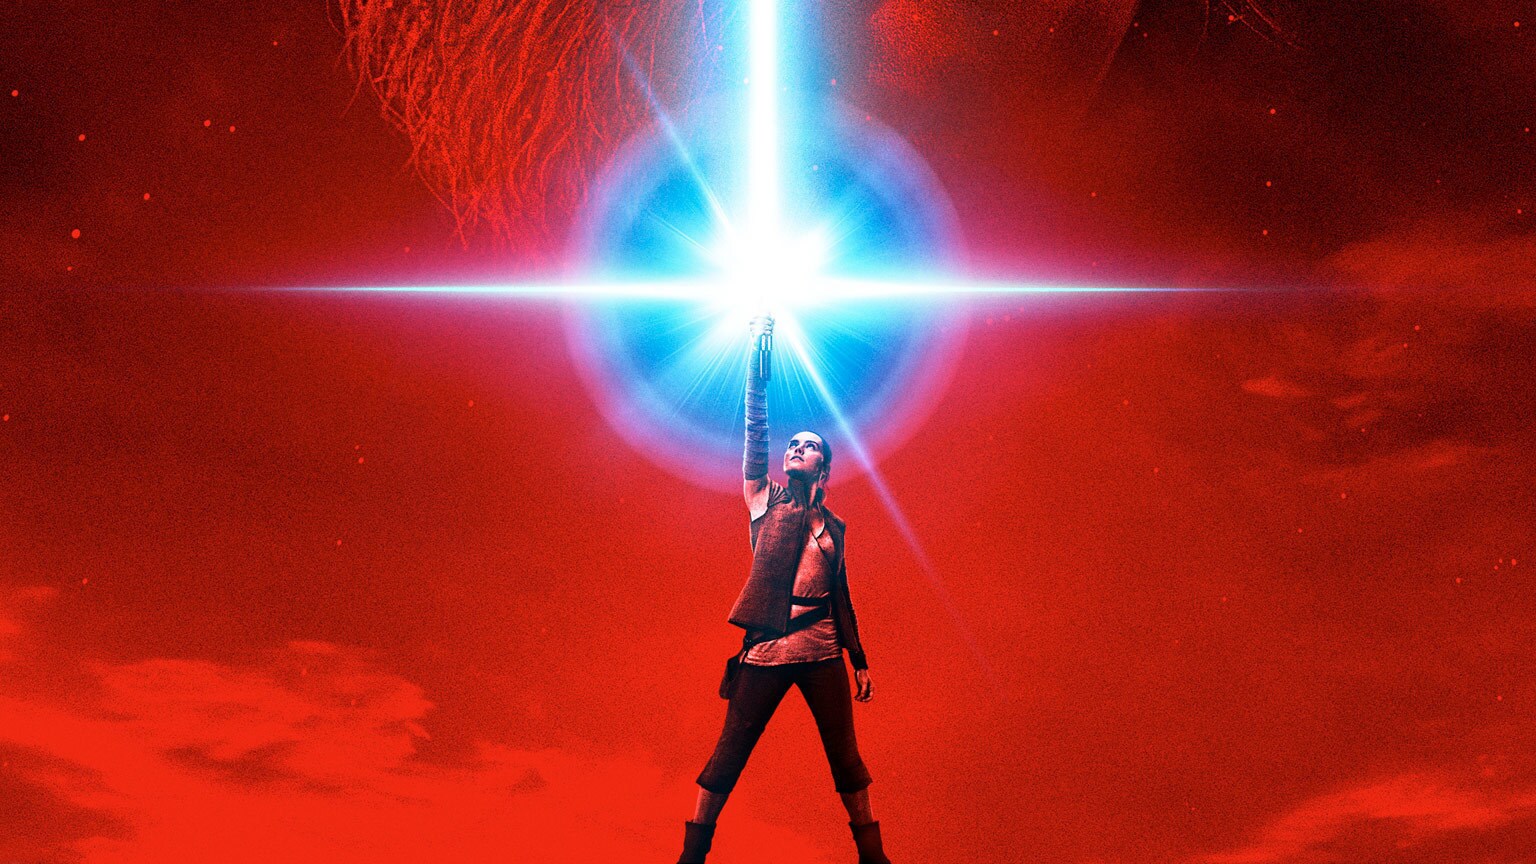 UPDATED: Star Wars: The Last Jedi Ticket Offers and Giveaways